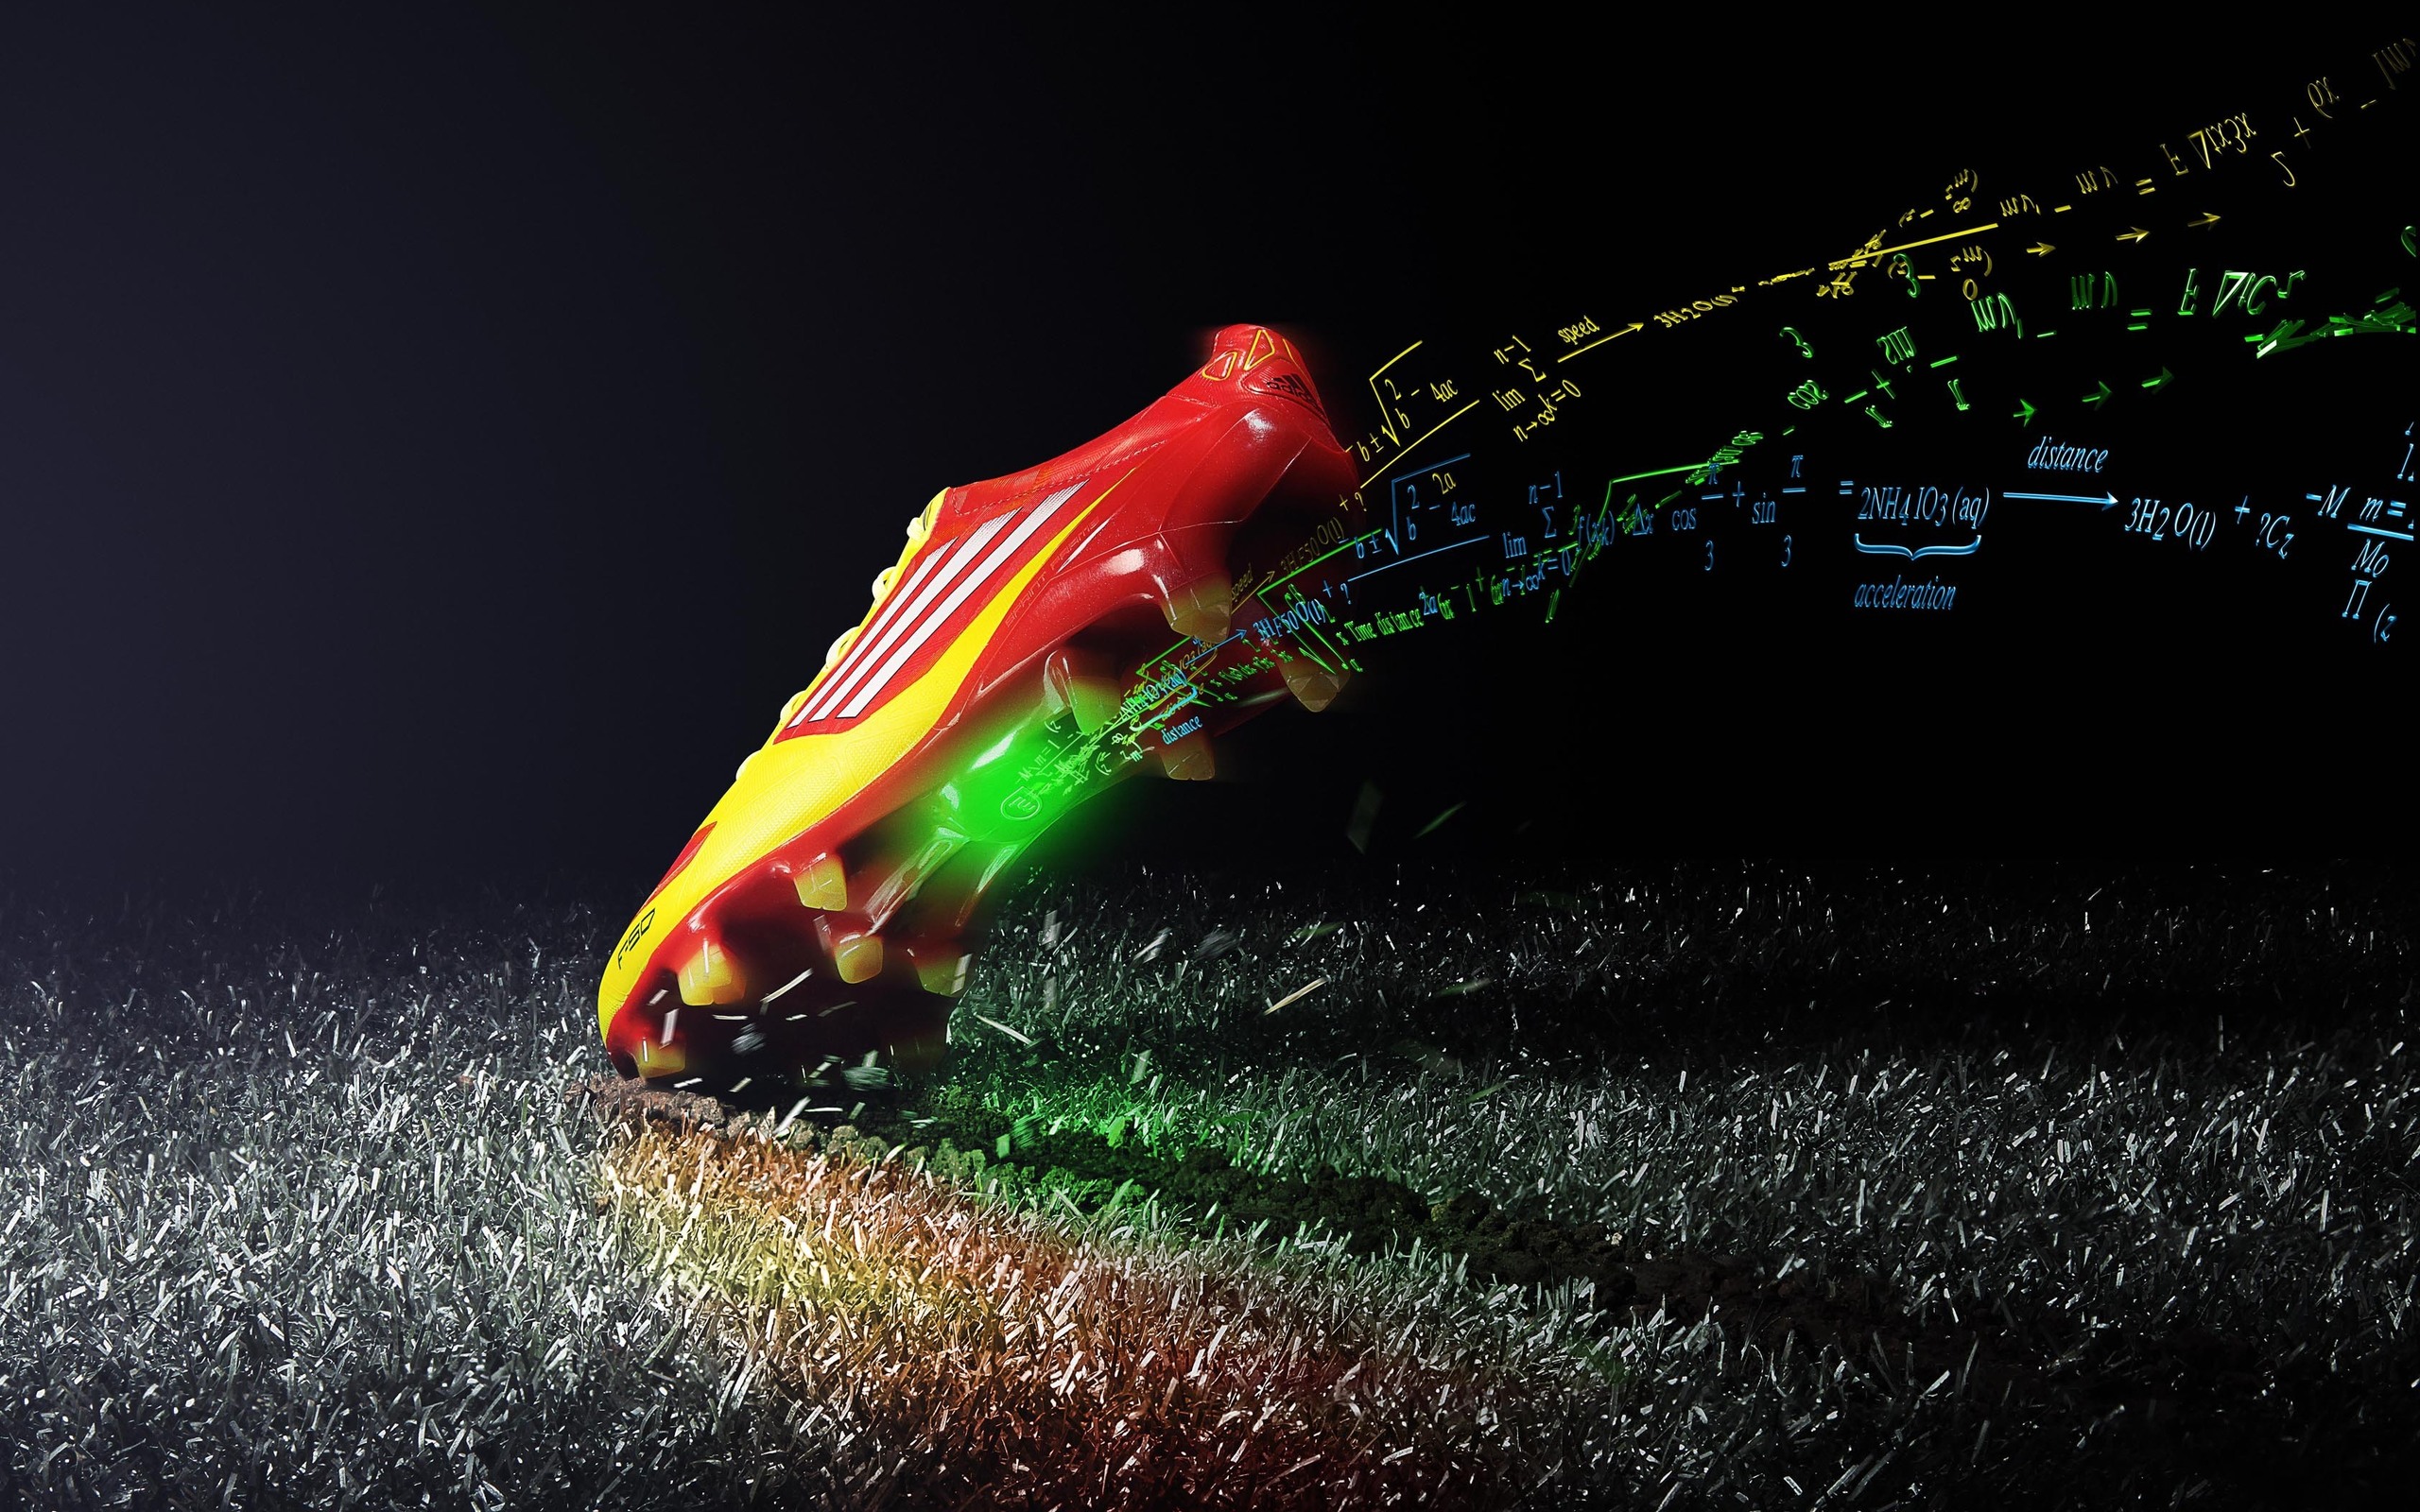 Products Adidas HD Wallpaper | Background Image